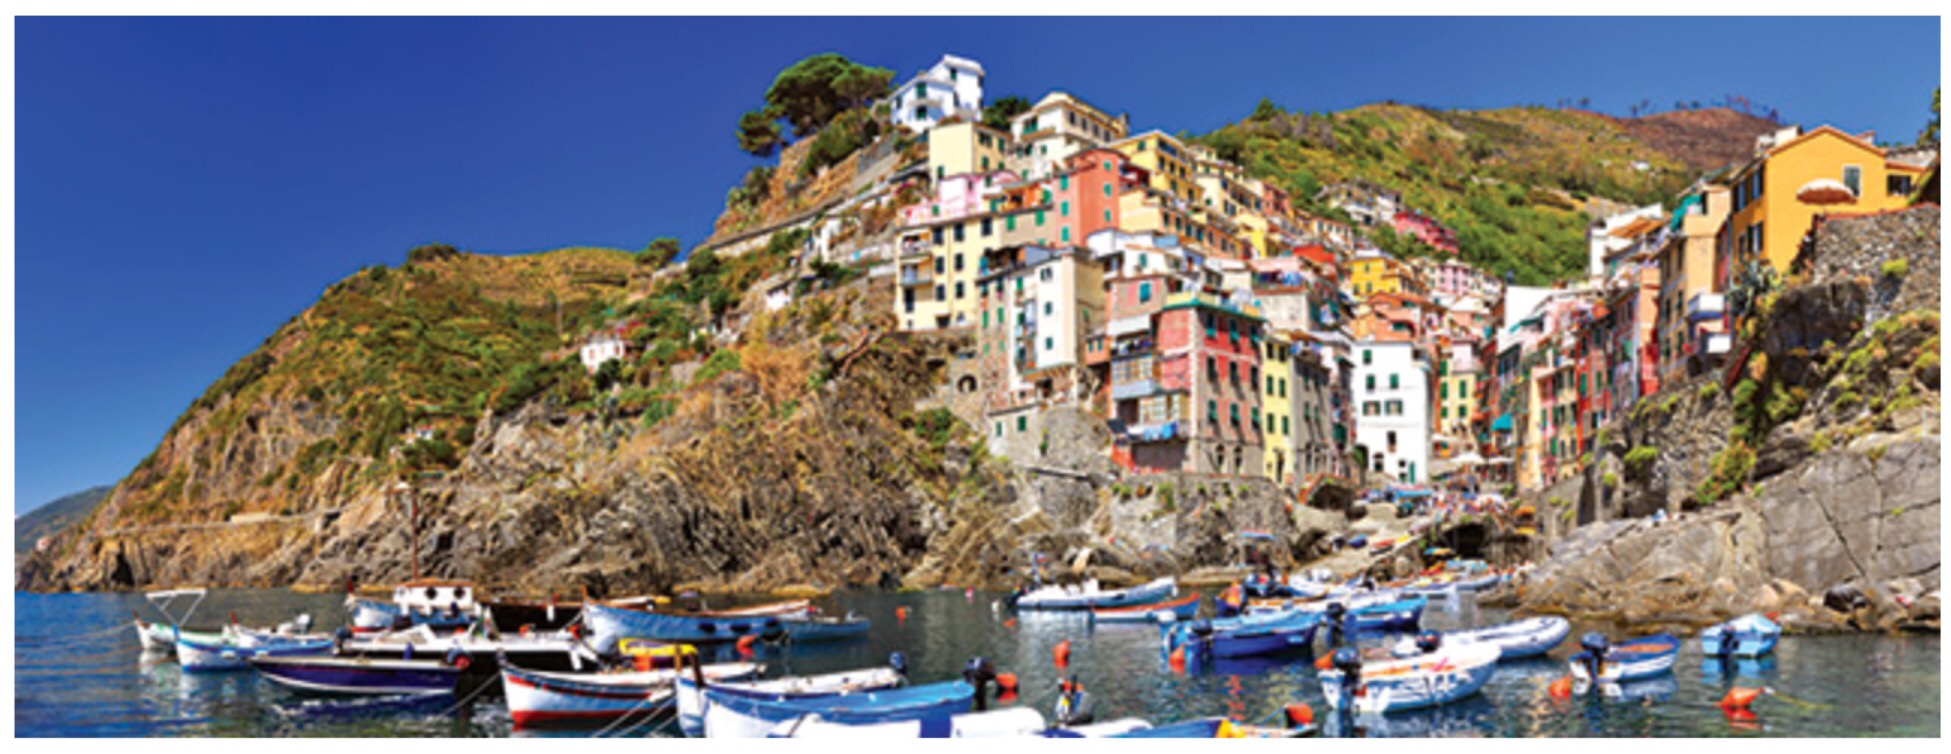 The Cinque Terre in Northern Italy is an optional excursion while we are in the Riveria